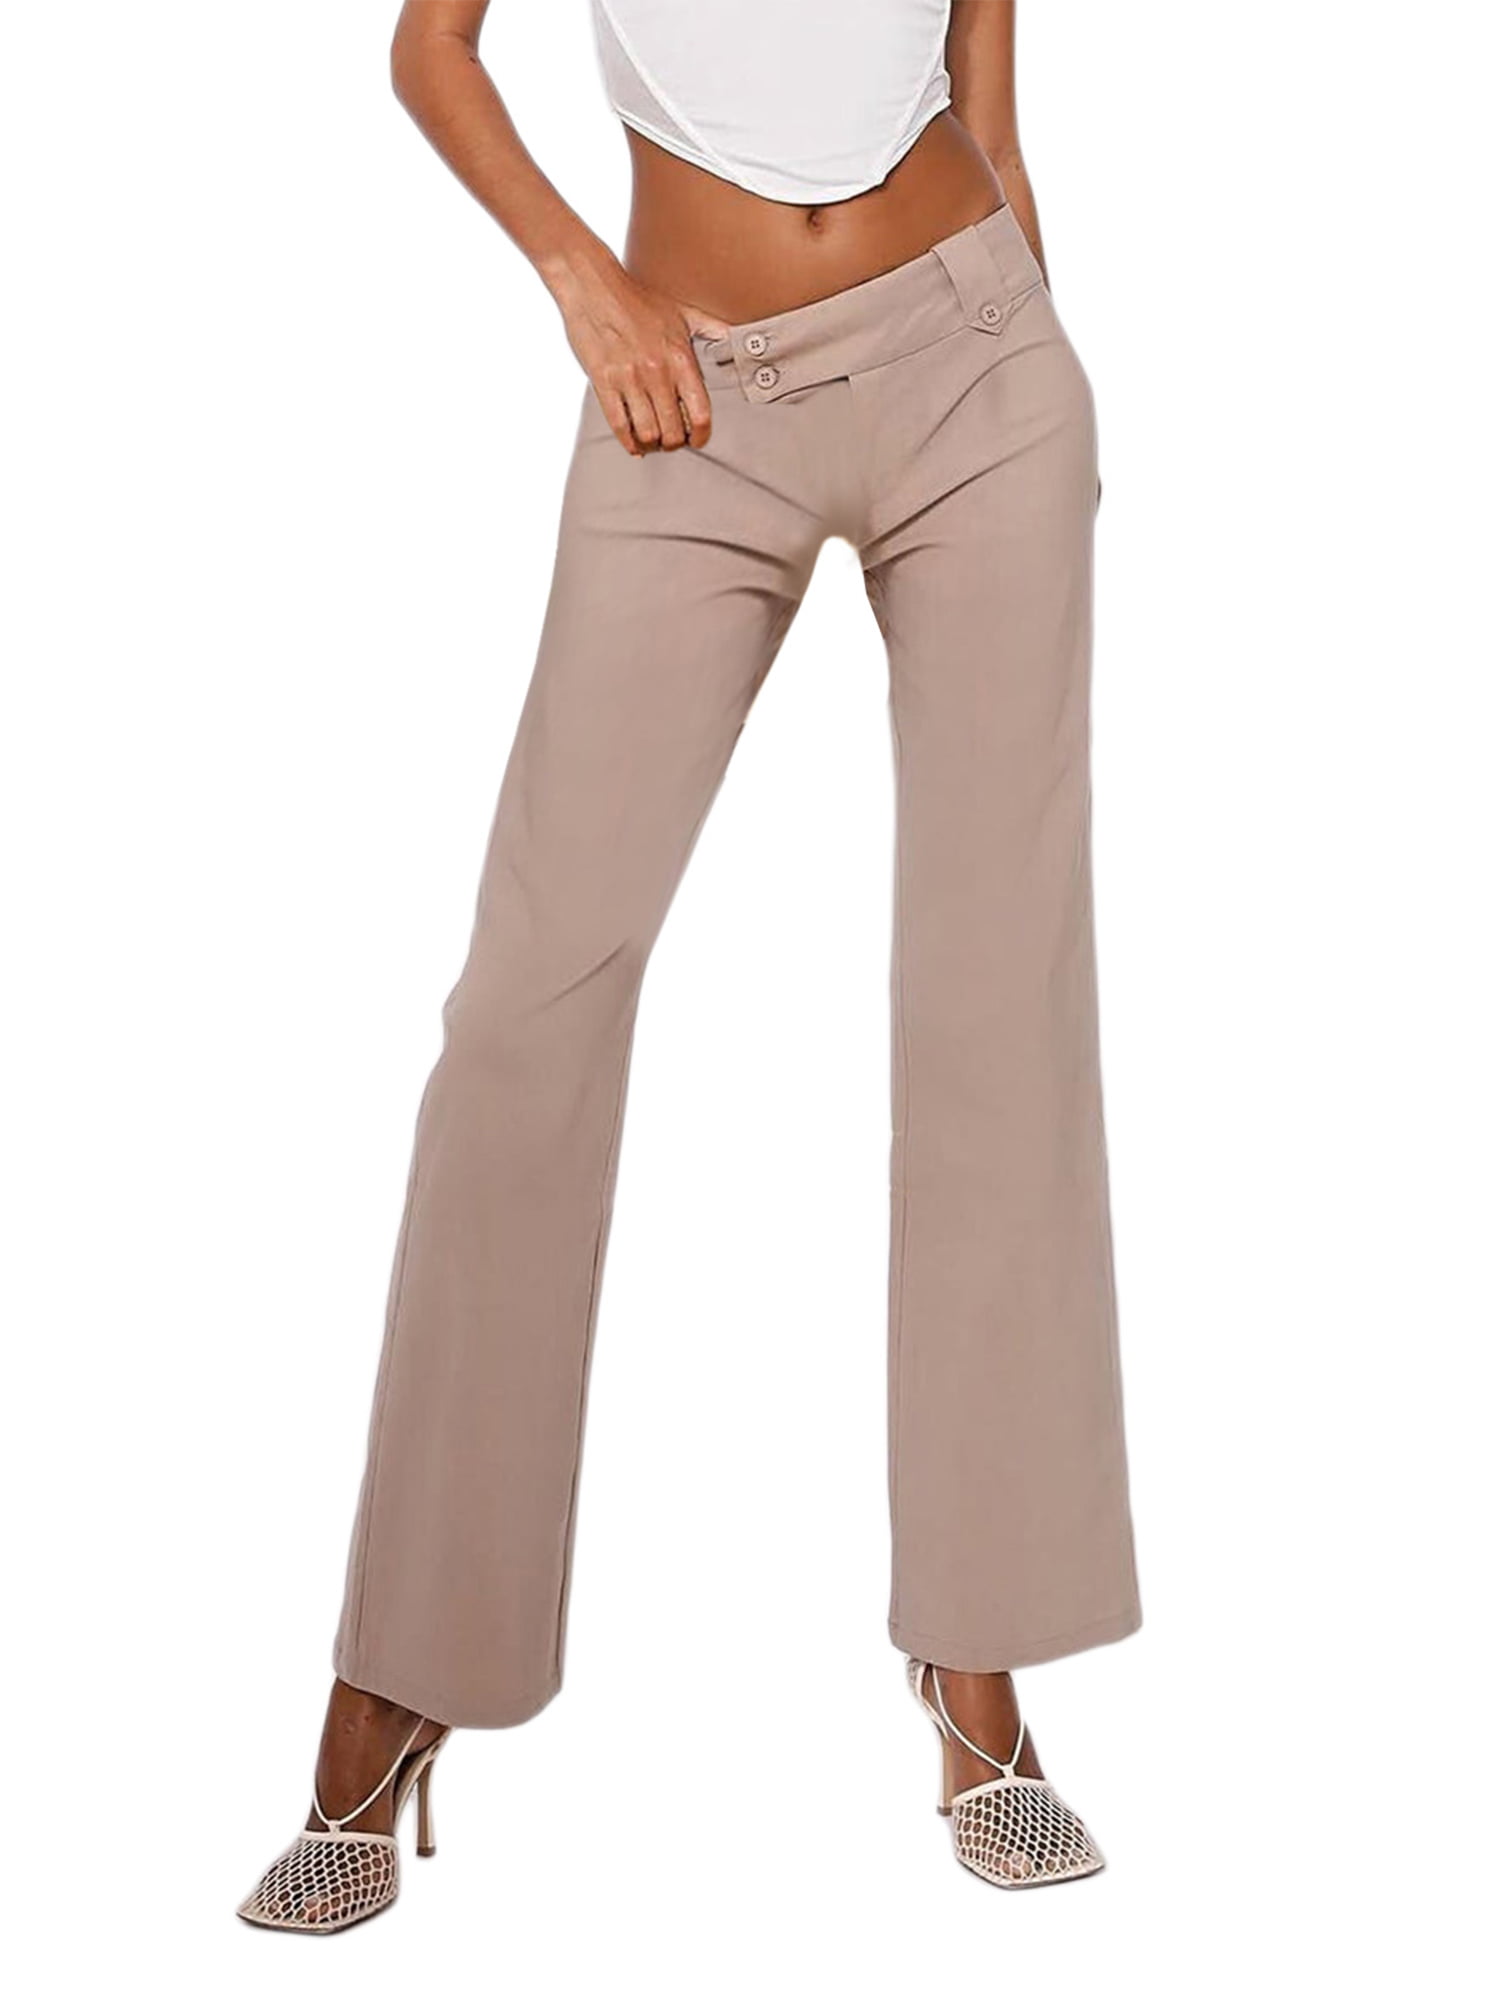 wdehow Women\'s Trousers Pants Female Flared Pants, Color Slightly Low Adult Casual Solid Waist